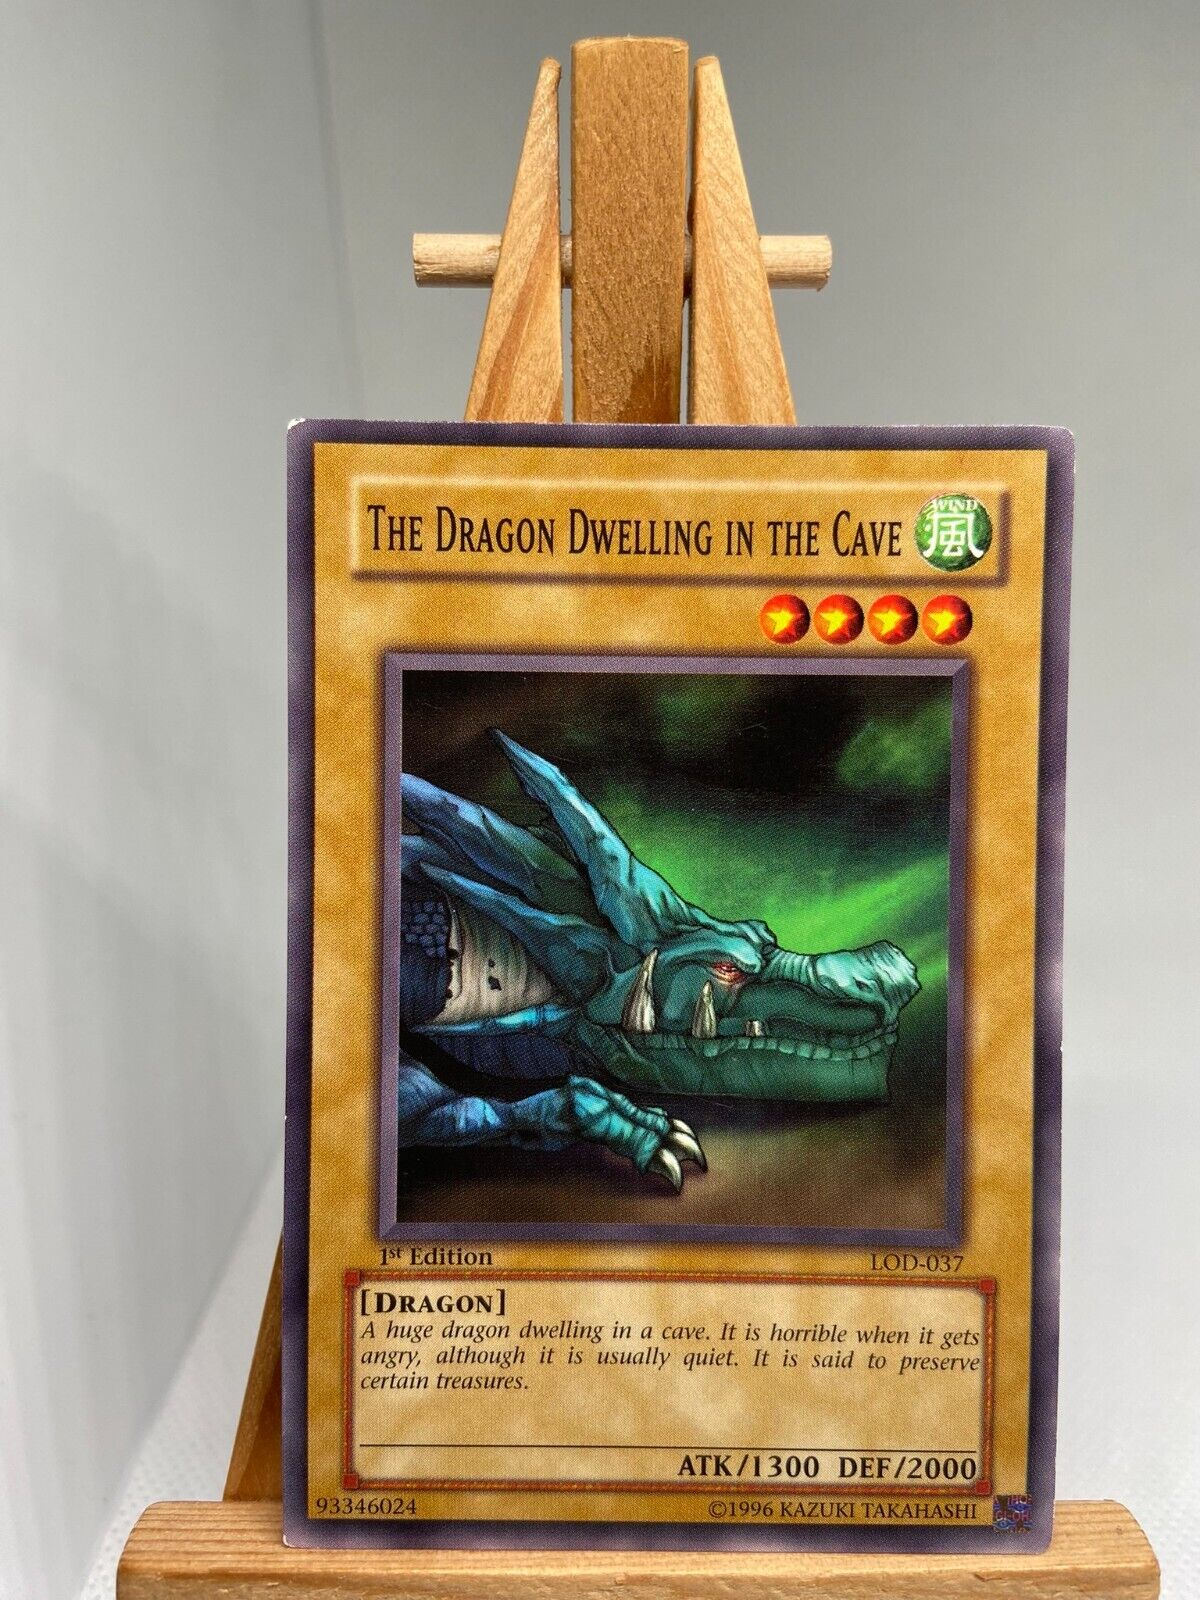 The Dragon Dwelling In The Cave - 1st Edition LOD-037 - MP - YuGiOh